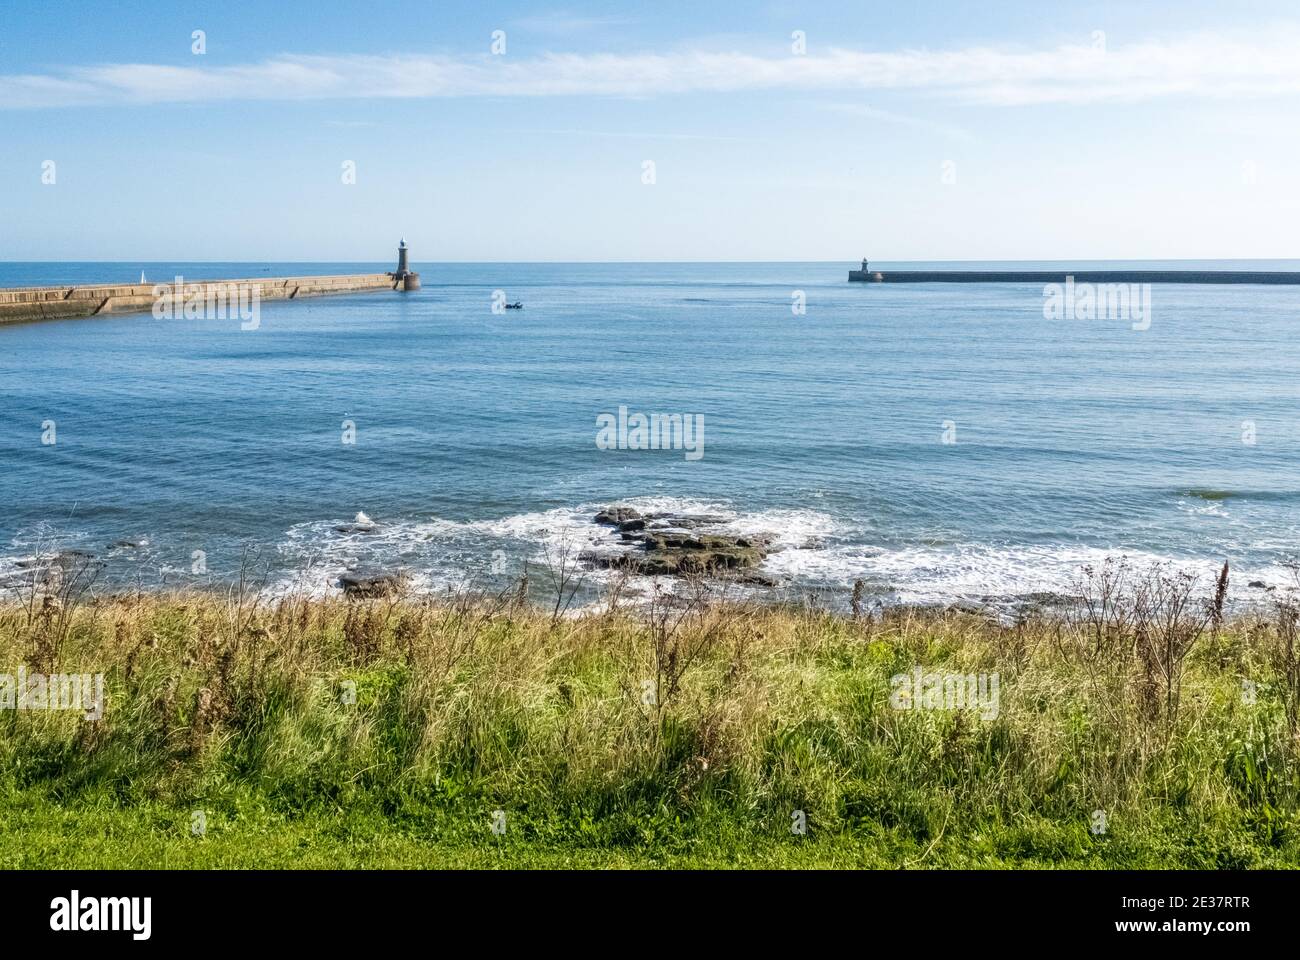 Tynemouth UK - 29th Sept 2020: Tynemouth Harbour and Tyne River estuary Stock Photo